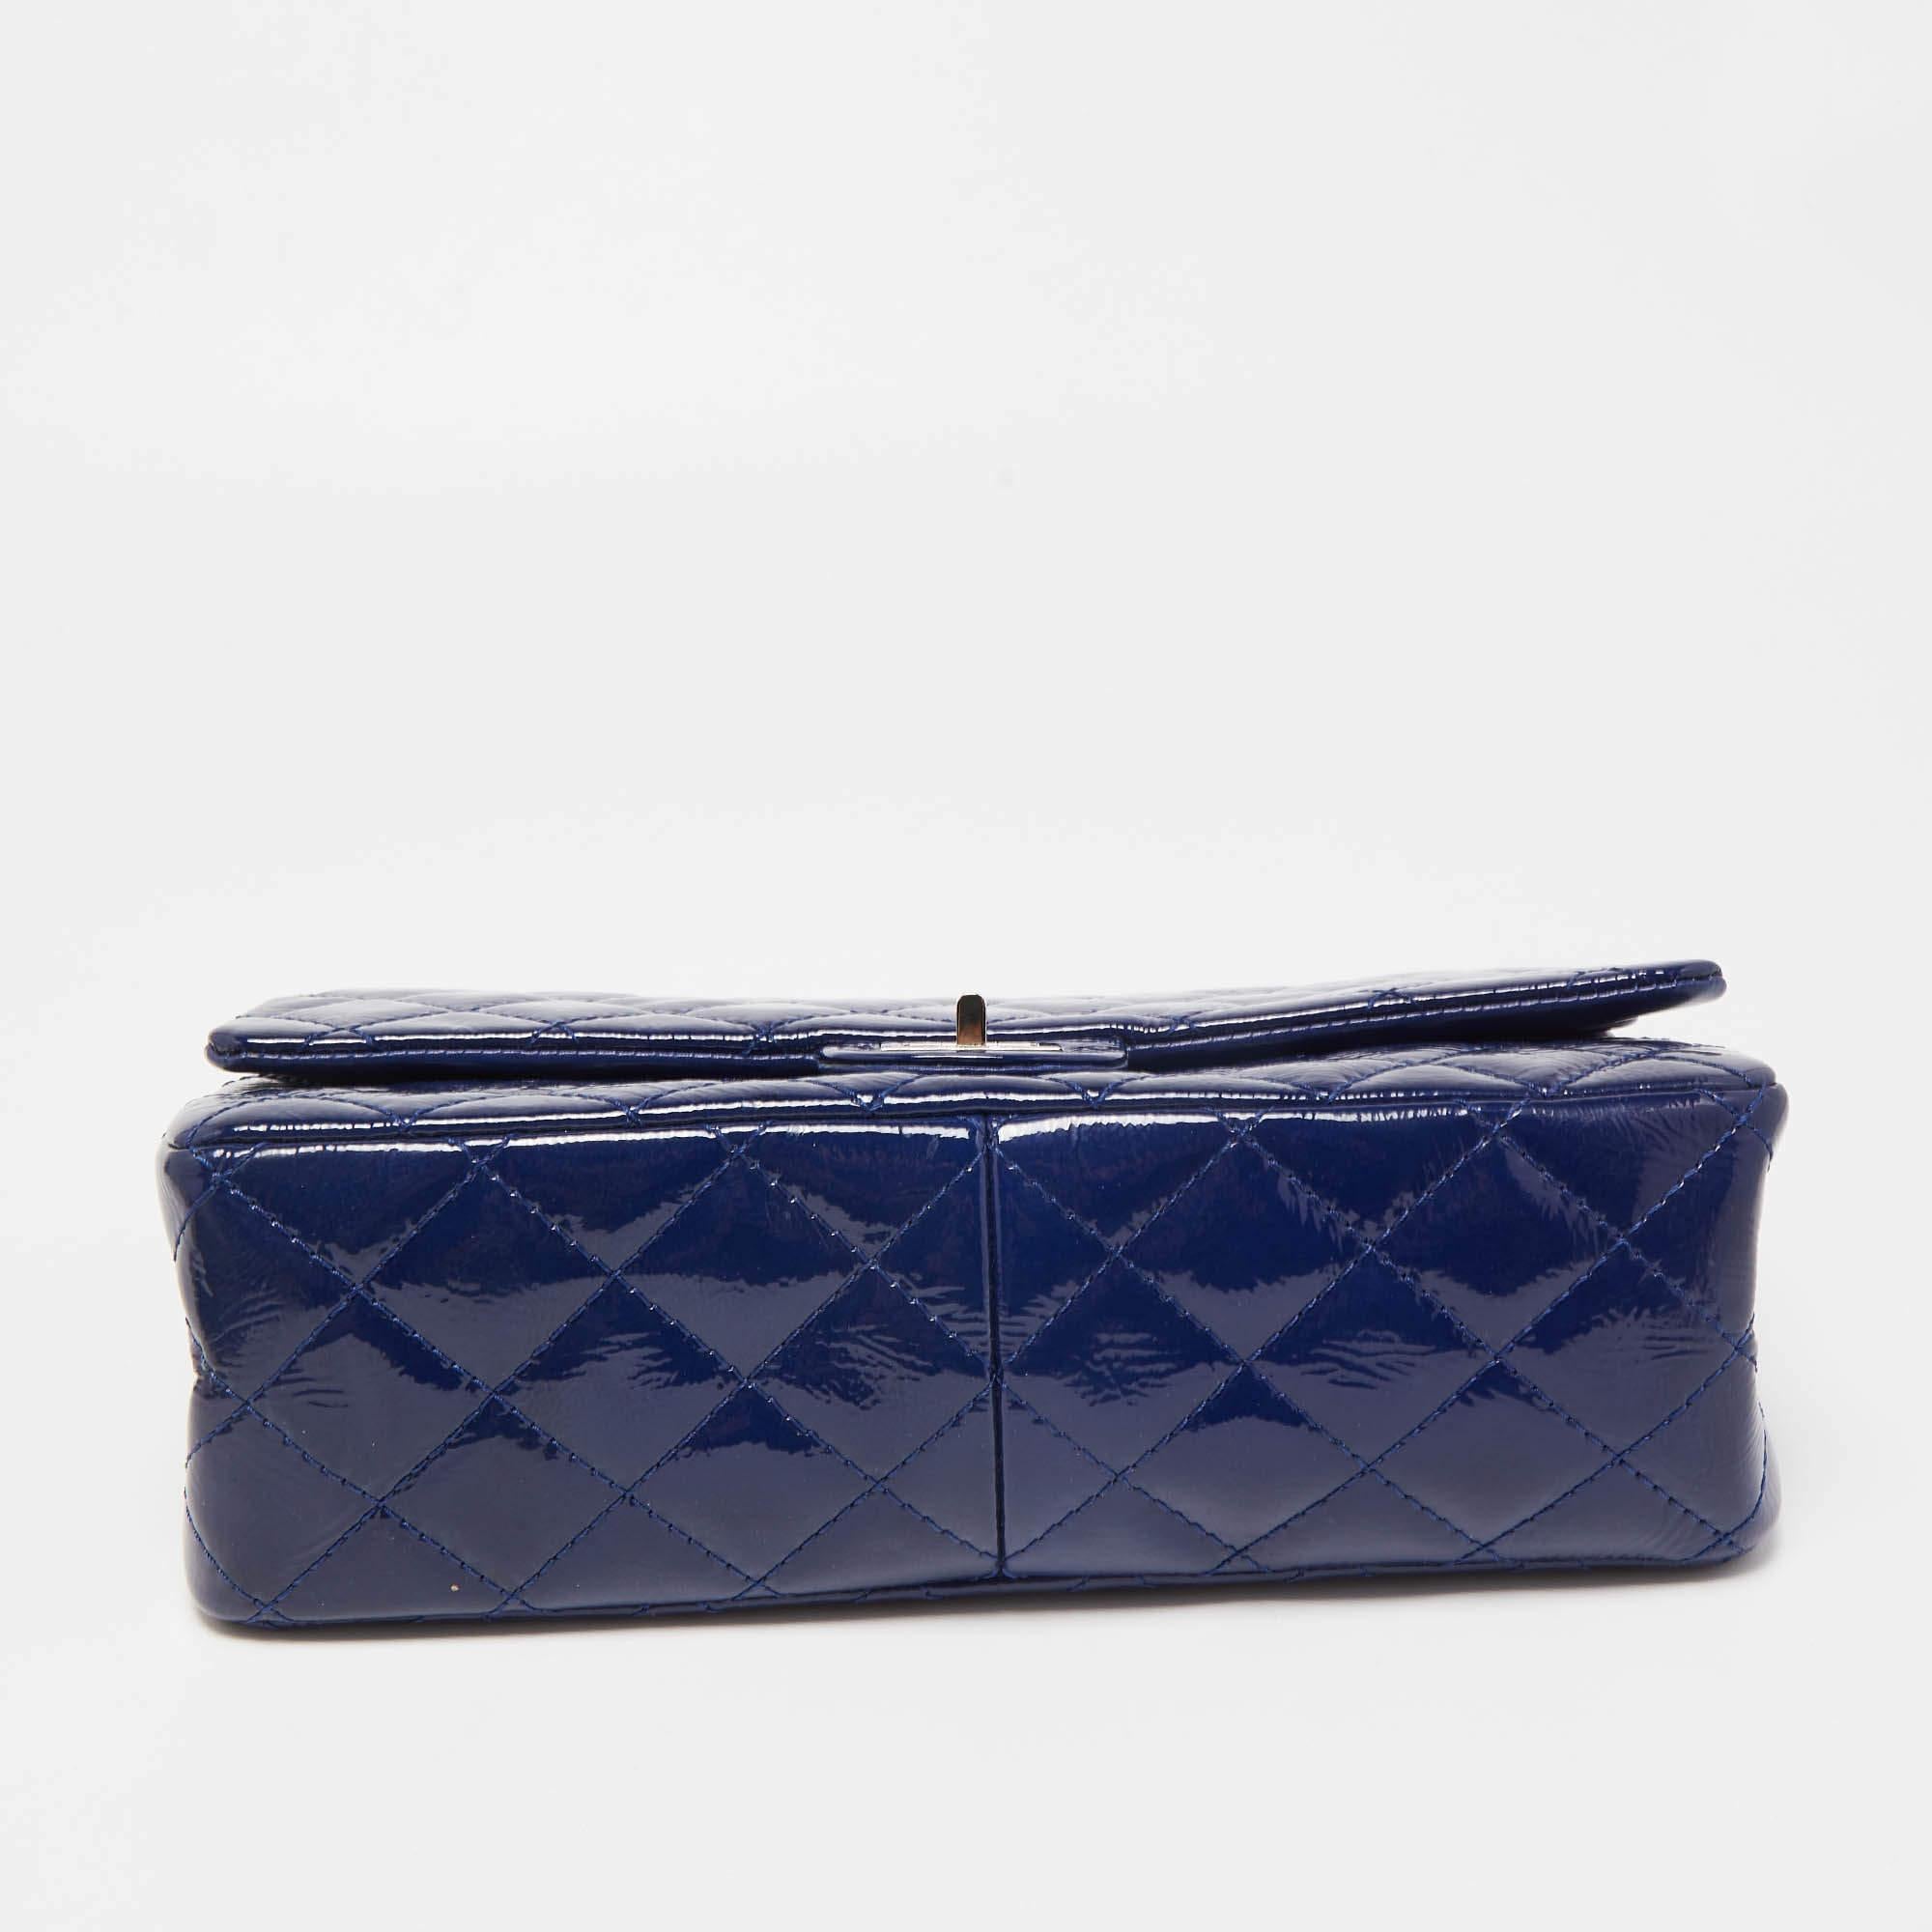 Chanel Blue Quilted Patent Leather Reissue 2.55 Classic 226 Flap Bag For Sale 12